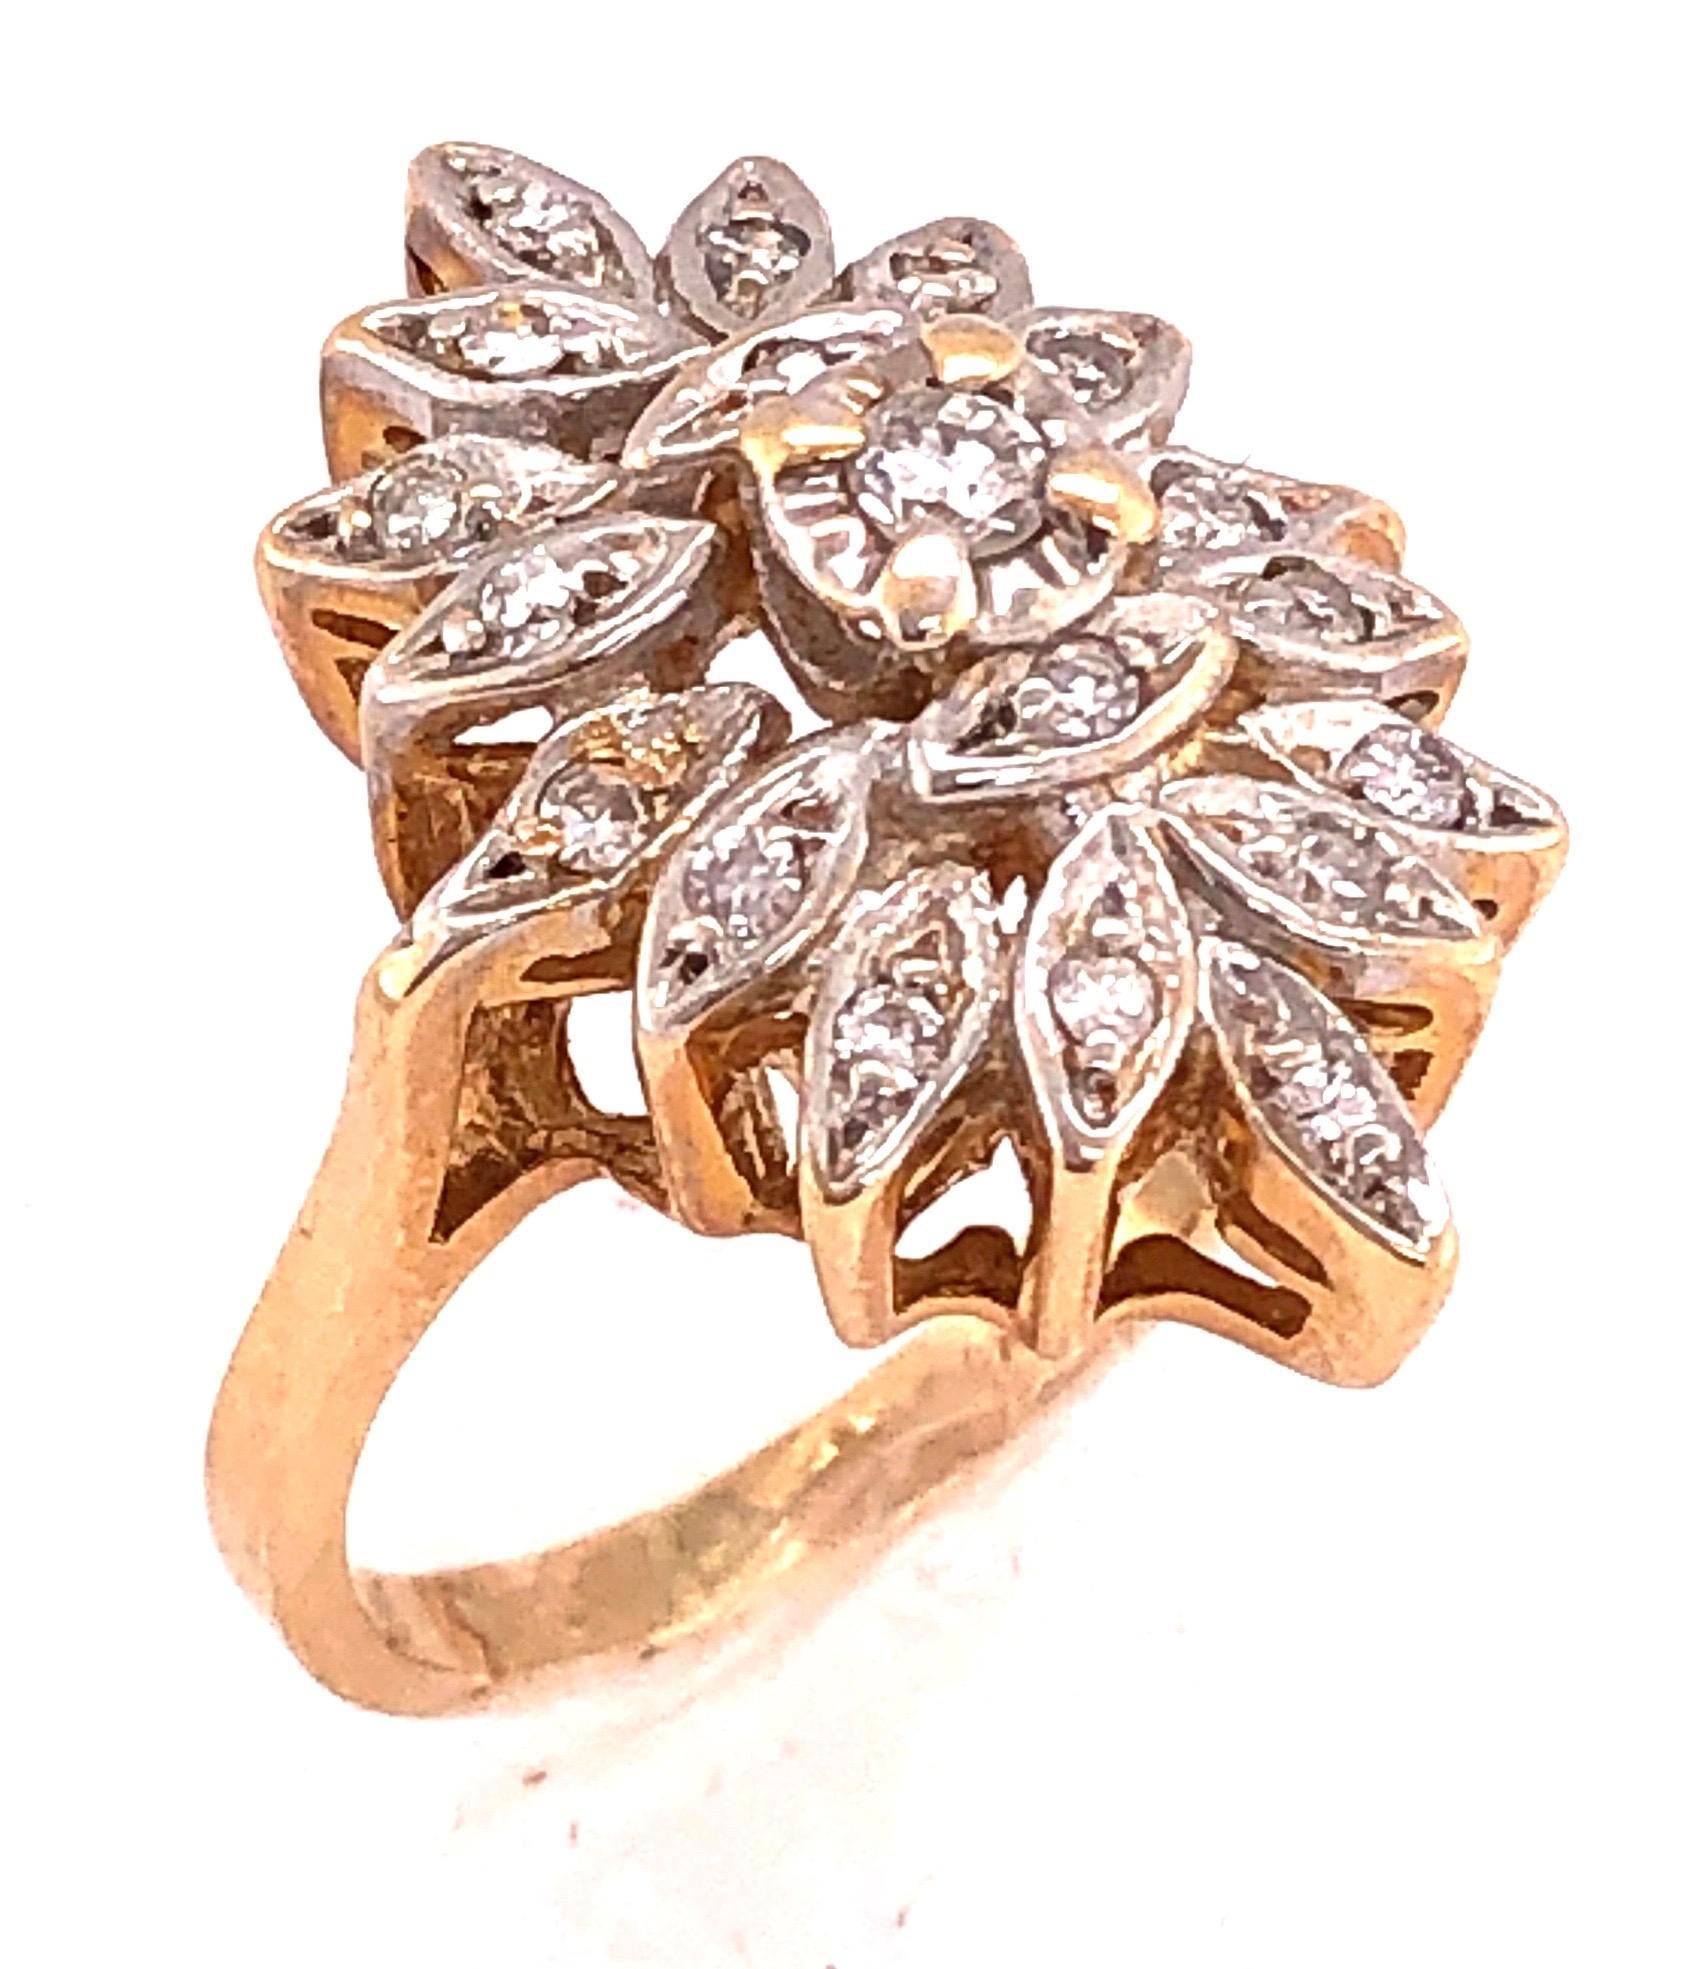 14 Karat Two-Tone White and Yellow Gold with Diamond Cluster Ring 0.50 TDW In Good Condition For Sale In Stamford, CT